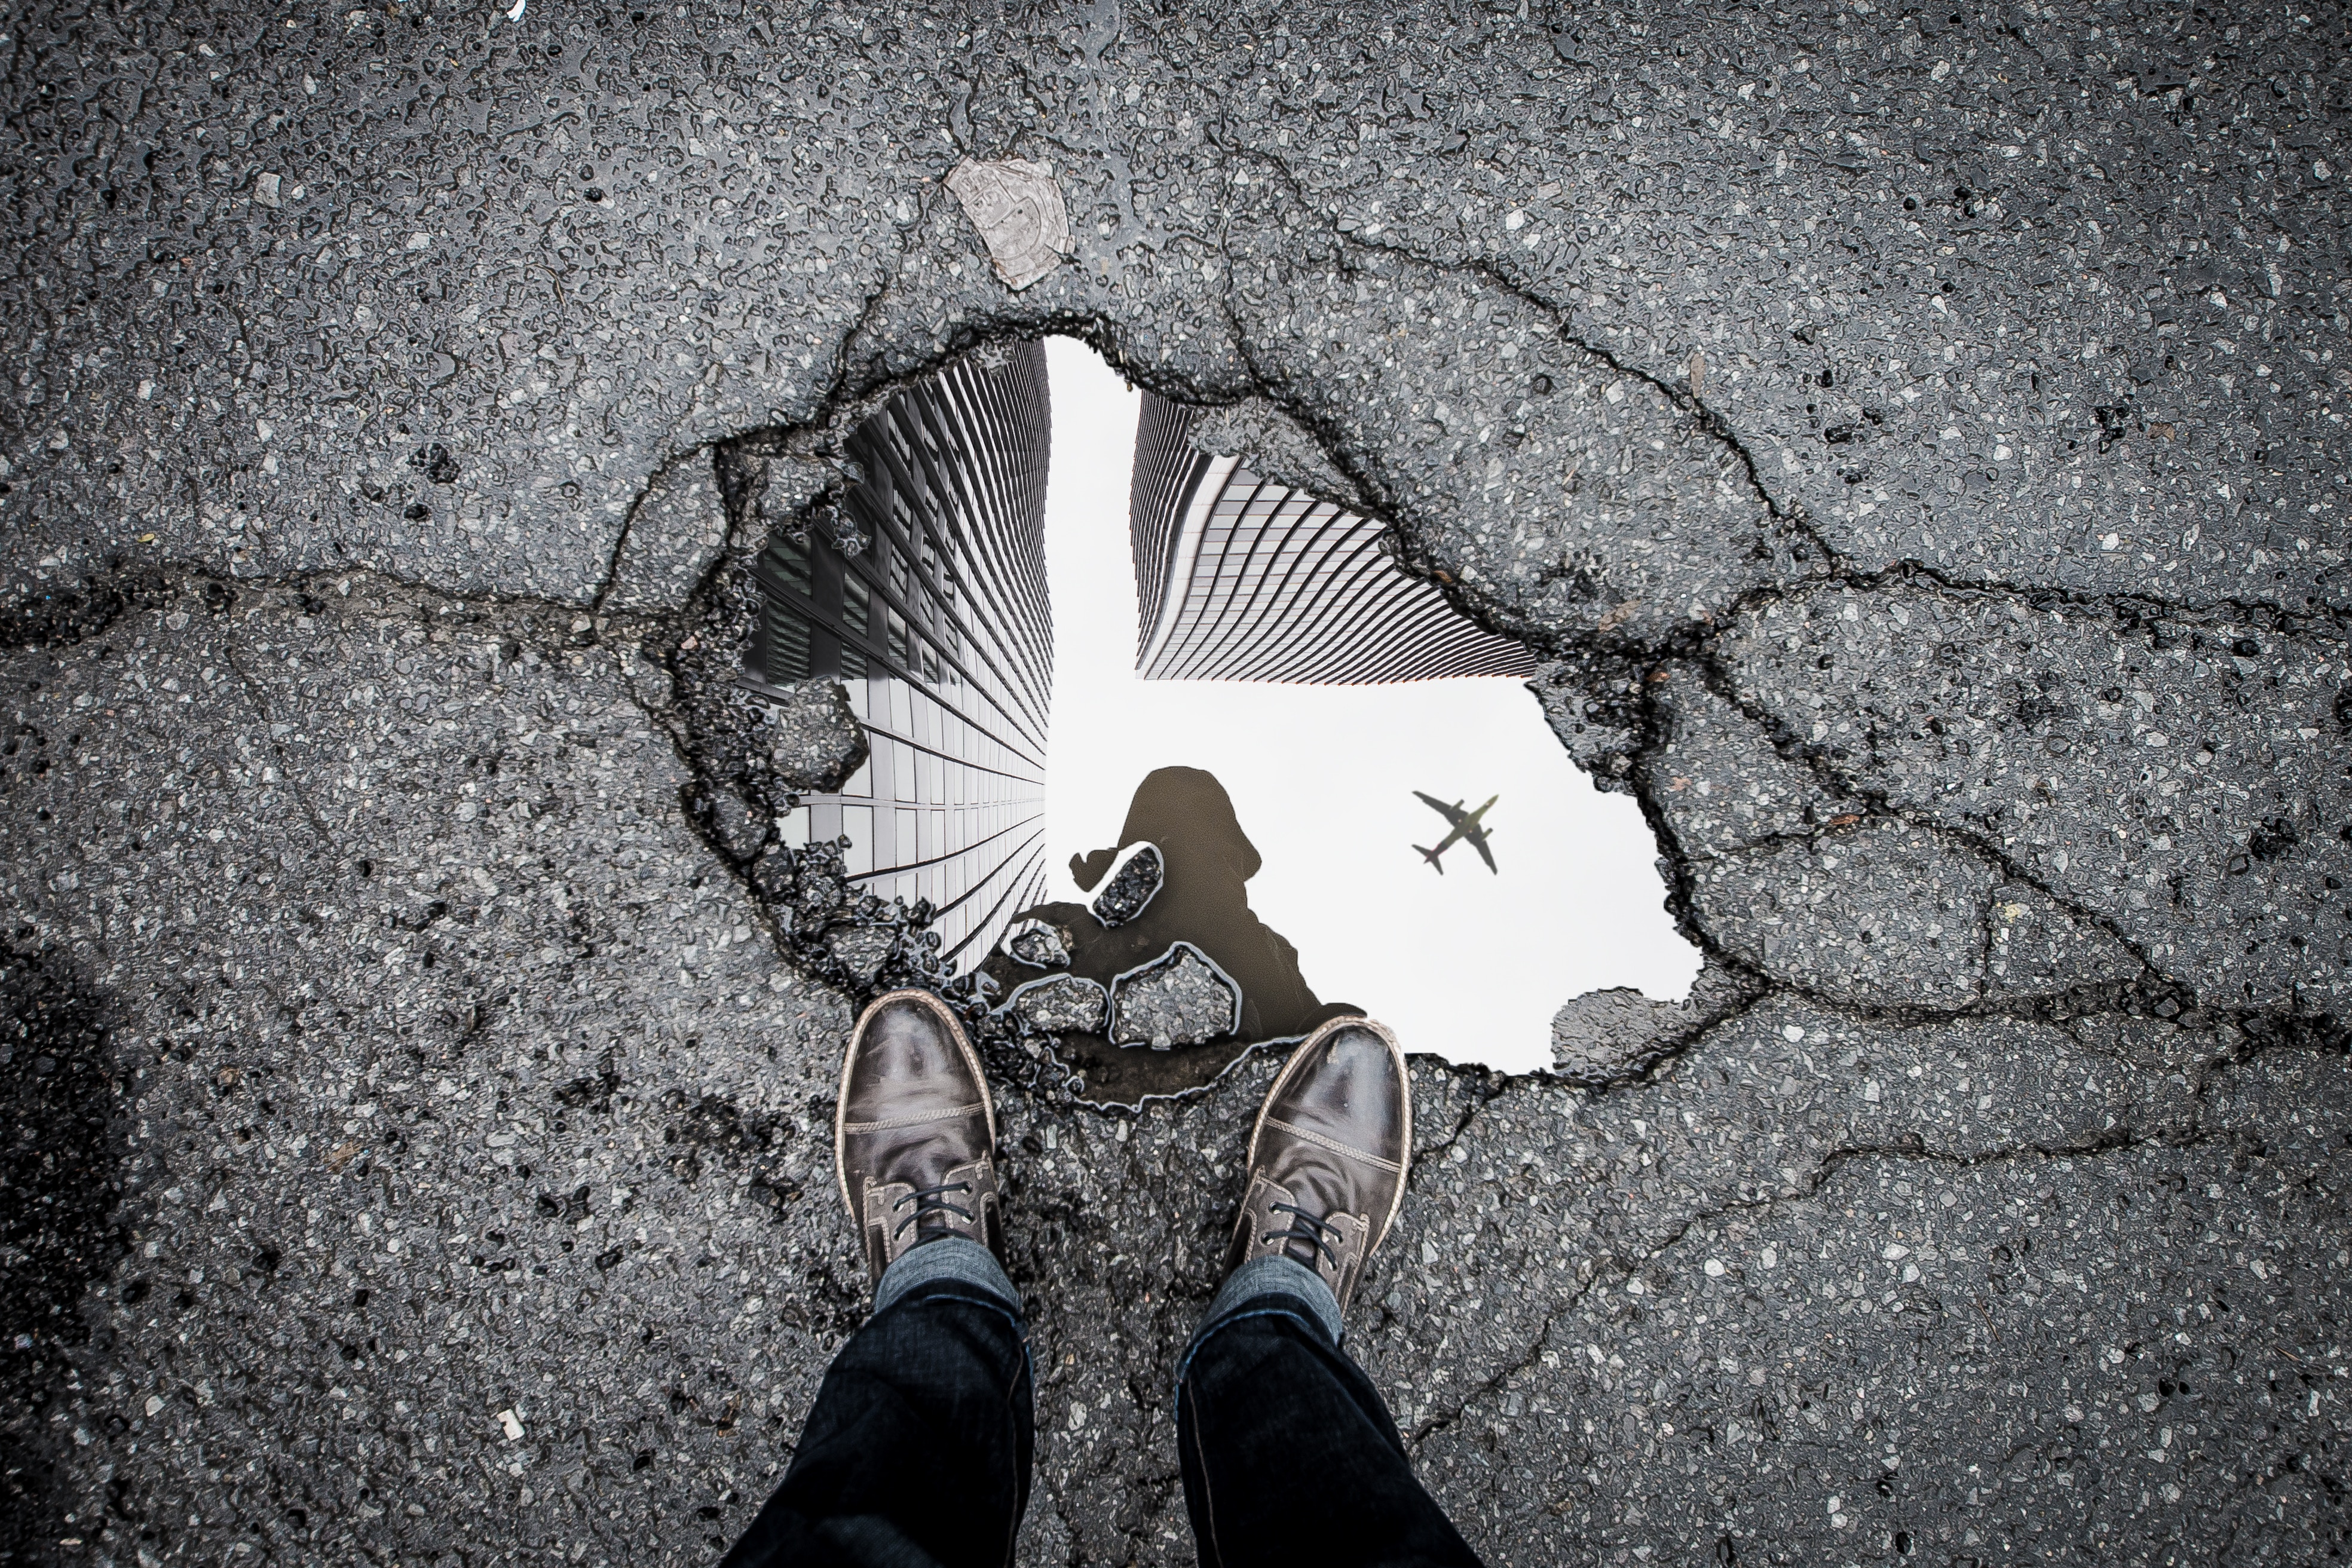 Person standing at a sink hole reflecting the city.